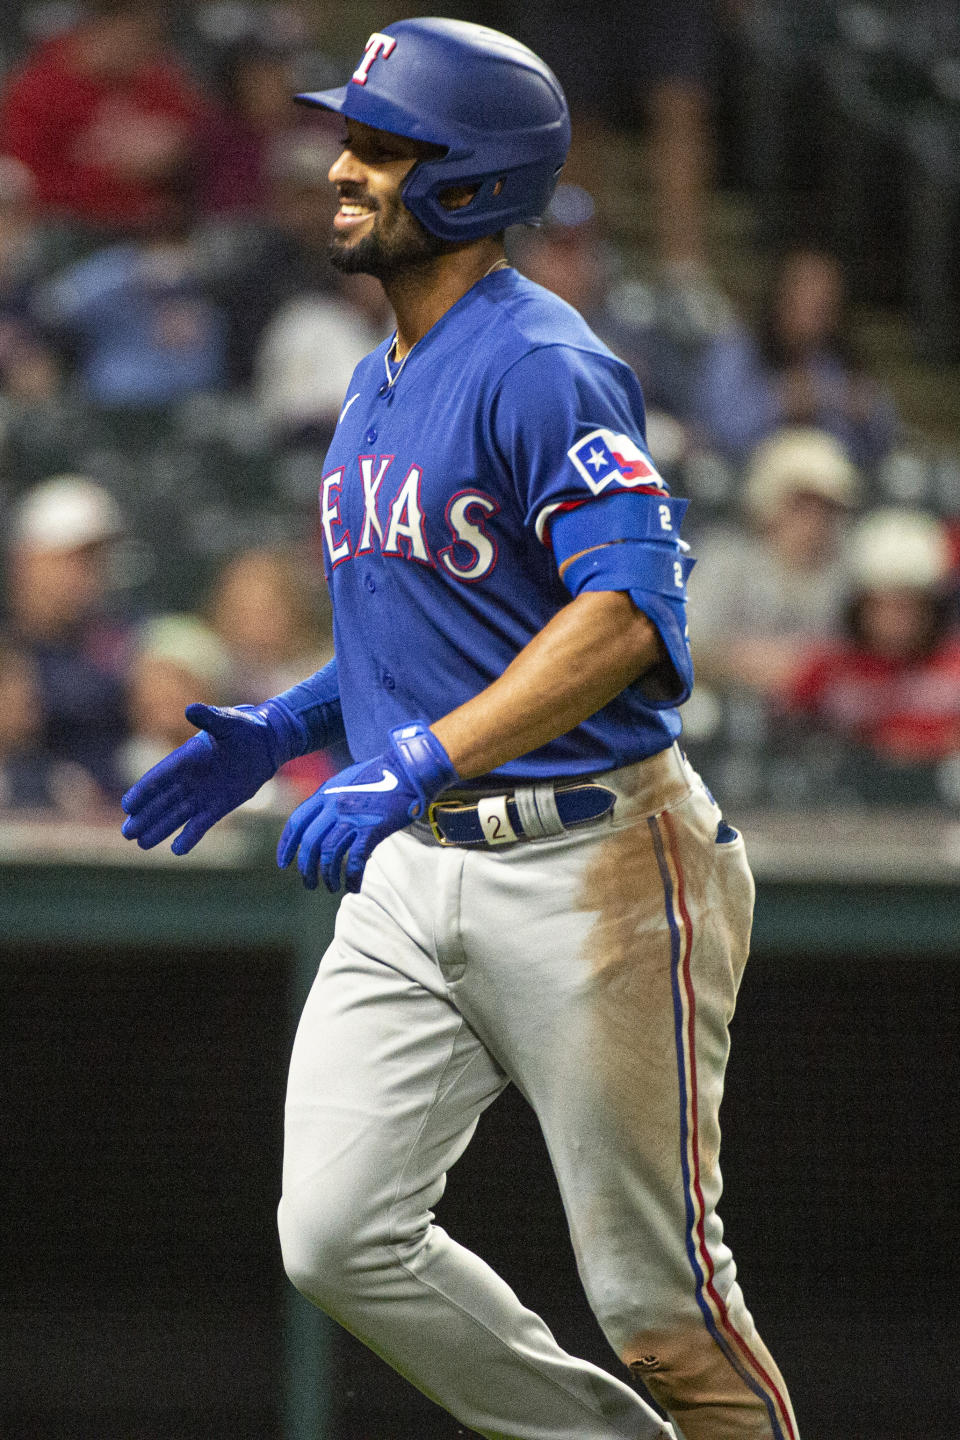 Texas Rangers' Marcus Semien smiles after hitting a solo home run off Cleveland Guardians relief pitcher Anthony Gose during the eighth inning of the second game of a baseball doubleheader in Cleveland, Tuesday, June 7, 2022. It was the second home run of the game for Semien and third of the day. (AP Photo/Phil Long)